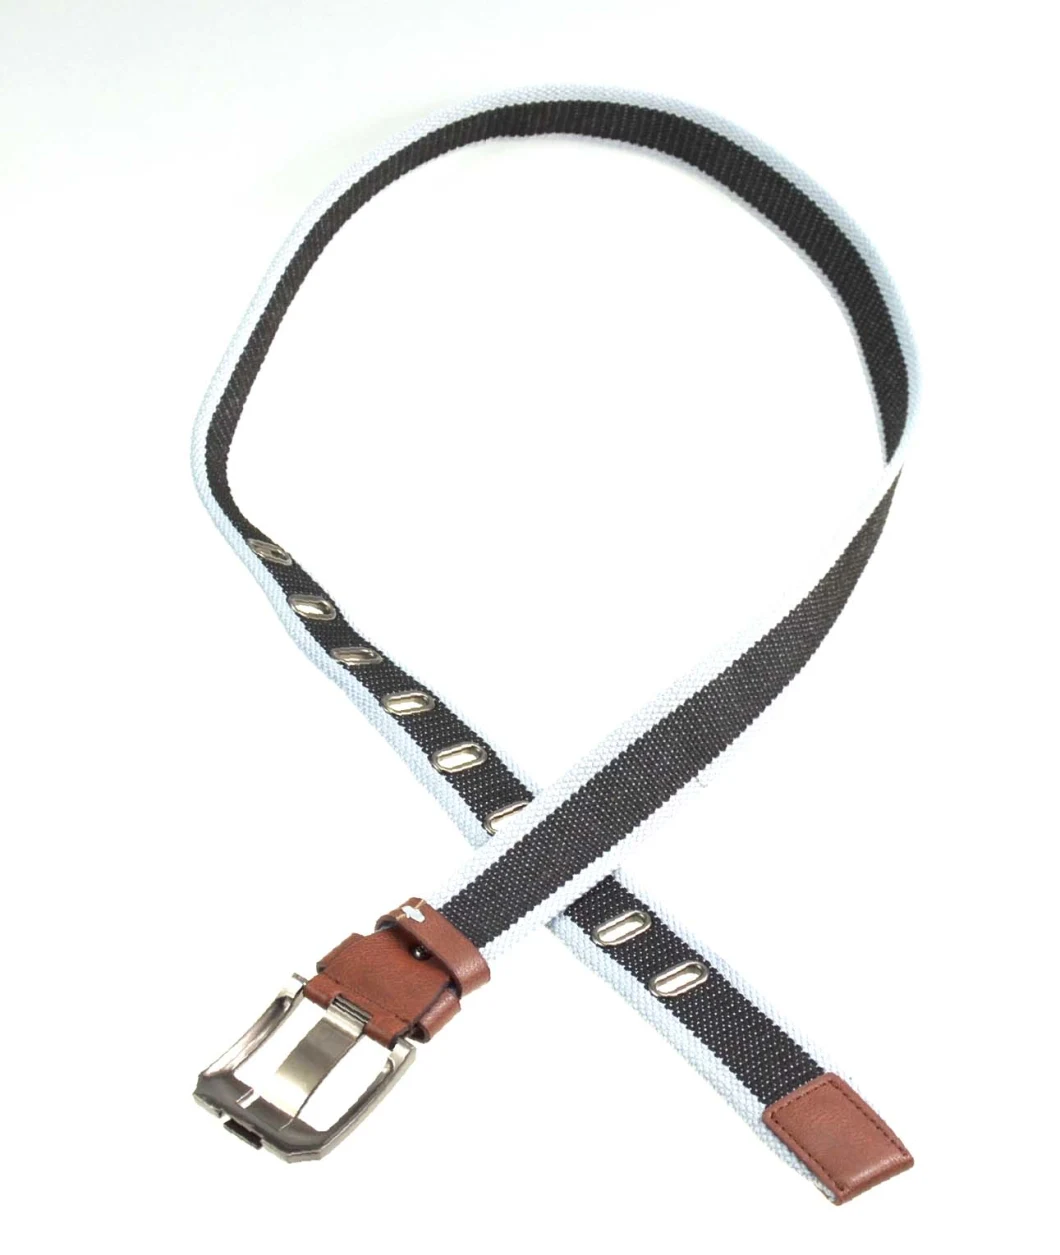 Fashion High Quality Polyester Canvas Weaving Belt with Eyelet Adjustment for Garment Accessories